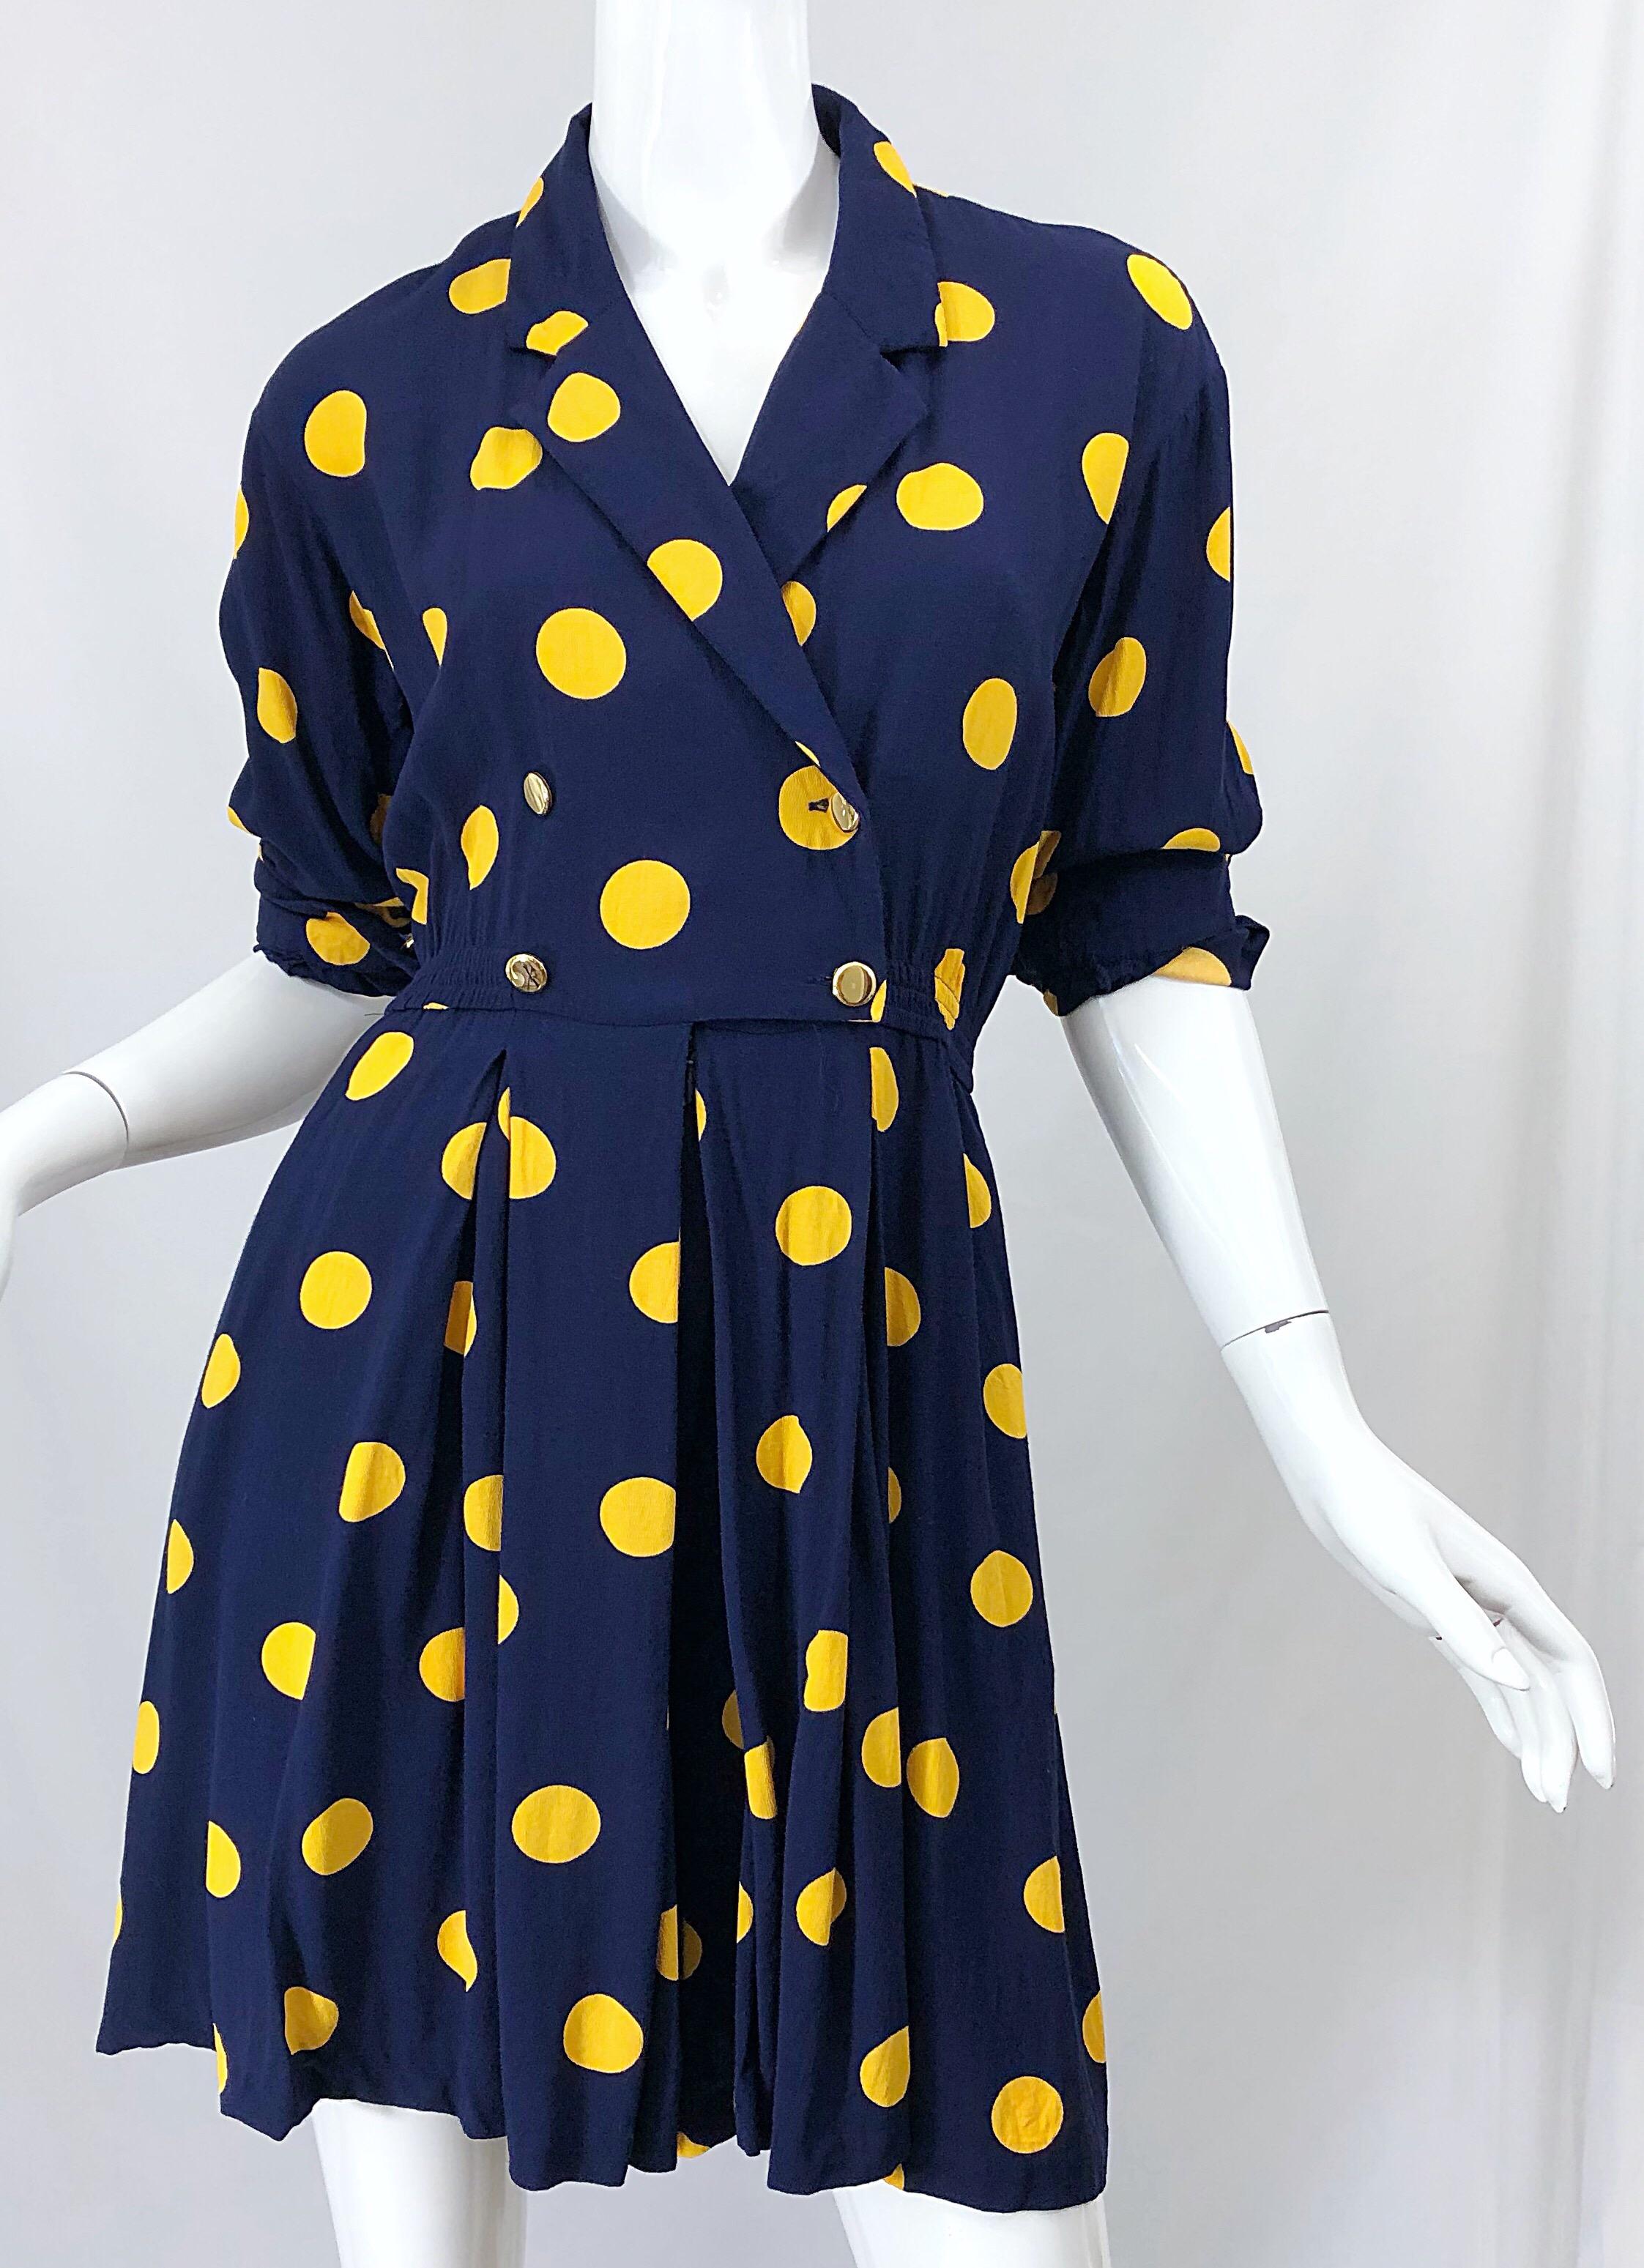 Size 8 Romper Late 1980s Navy Blue and Yellow Polka Dot 80s Vintage Romper 6